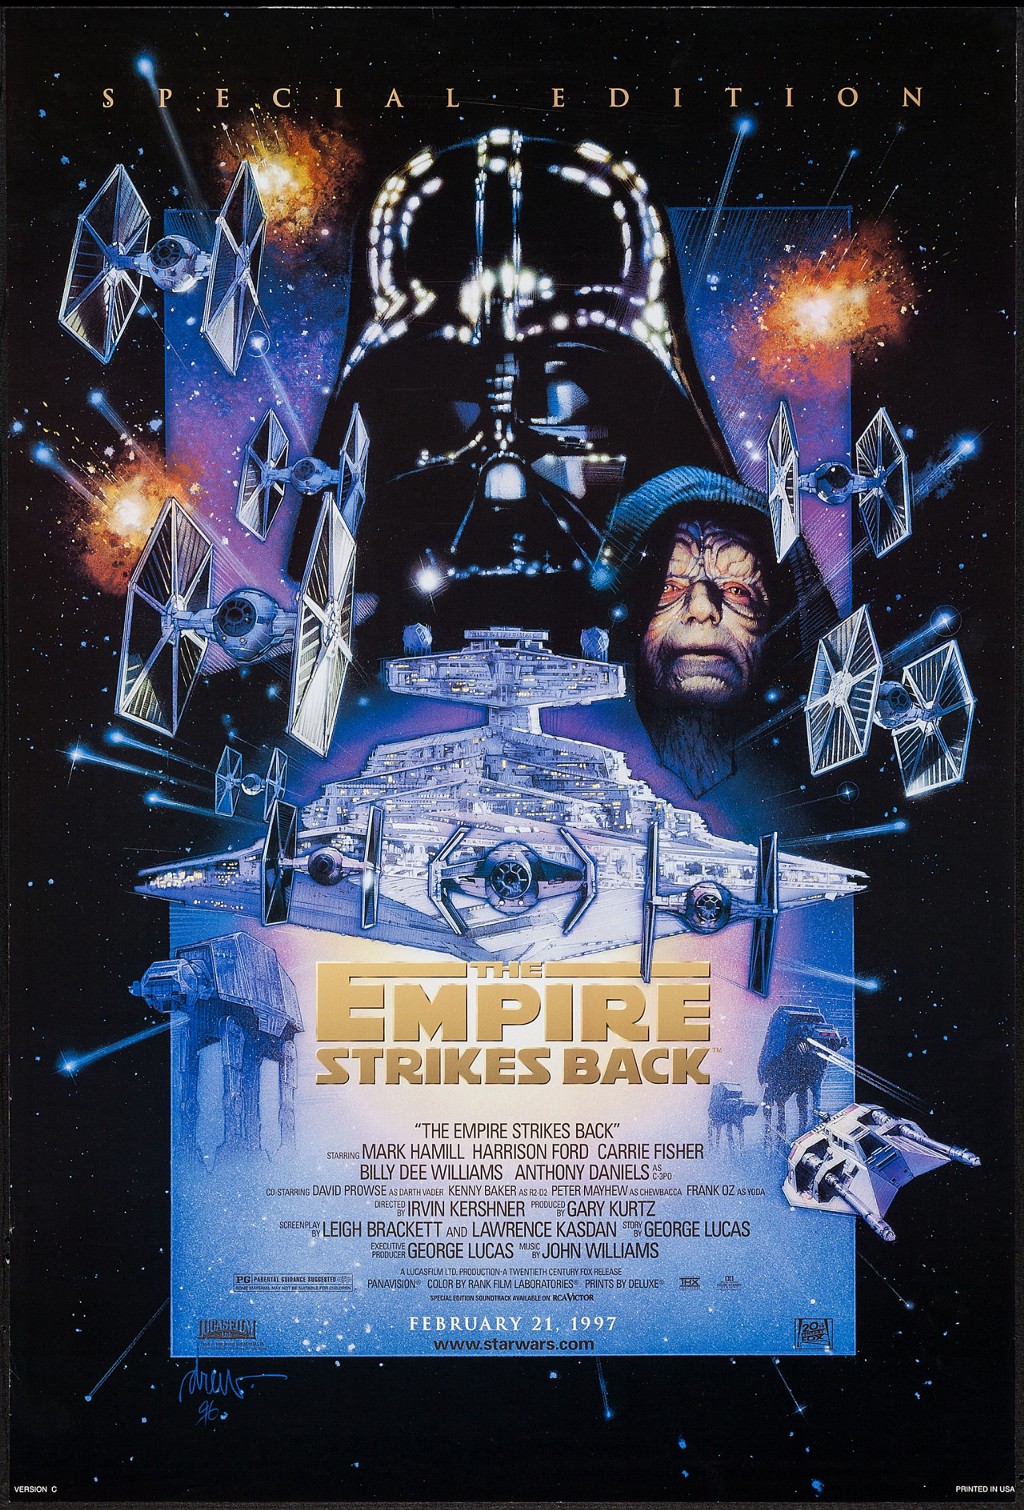 The History of Star Wars Posters